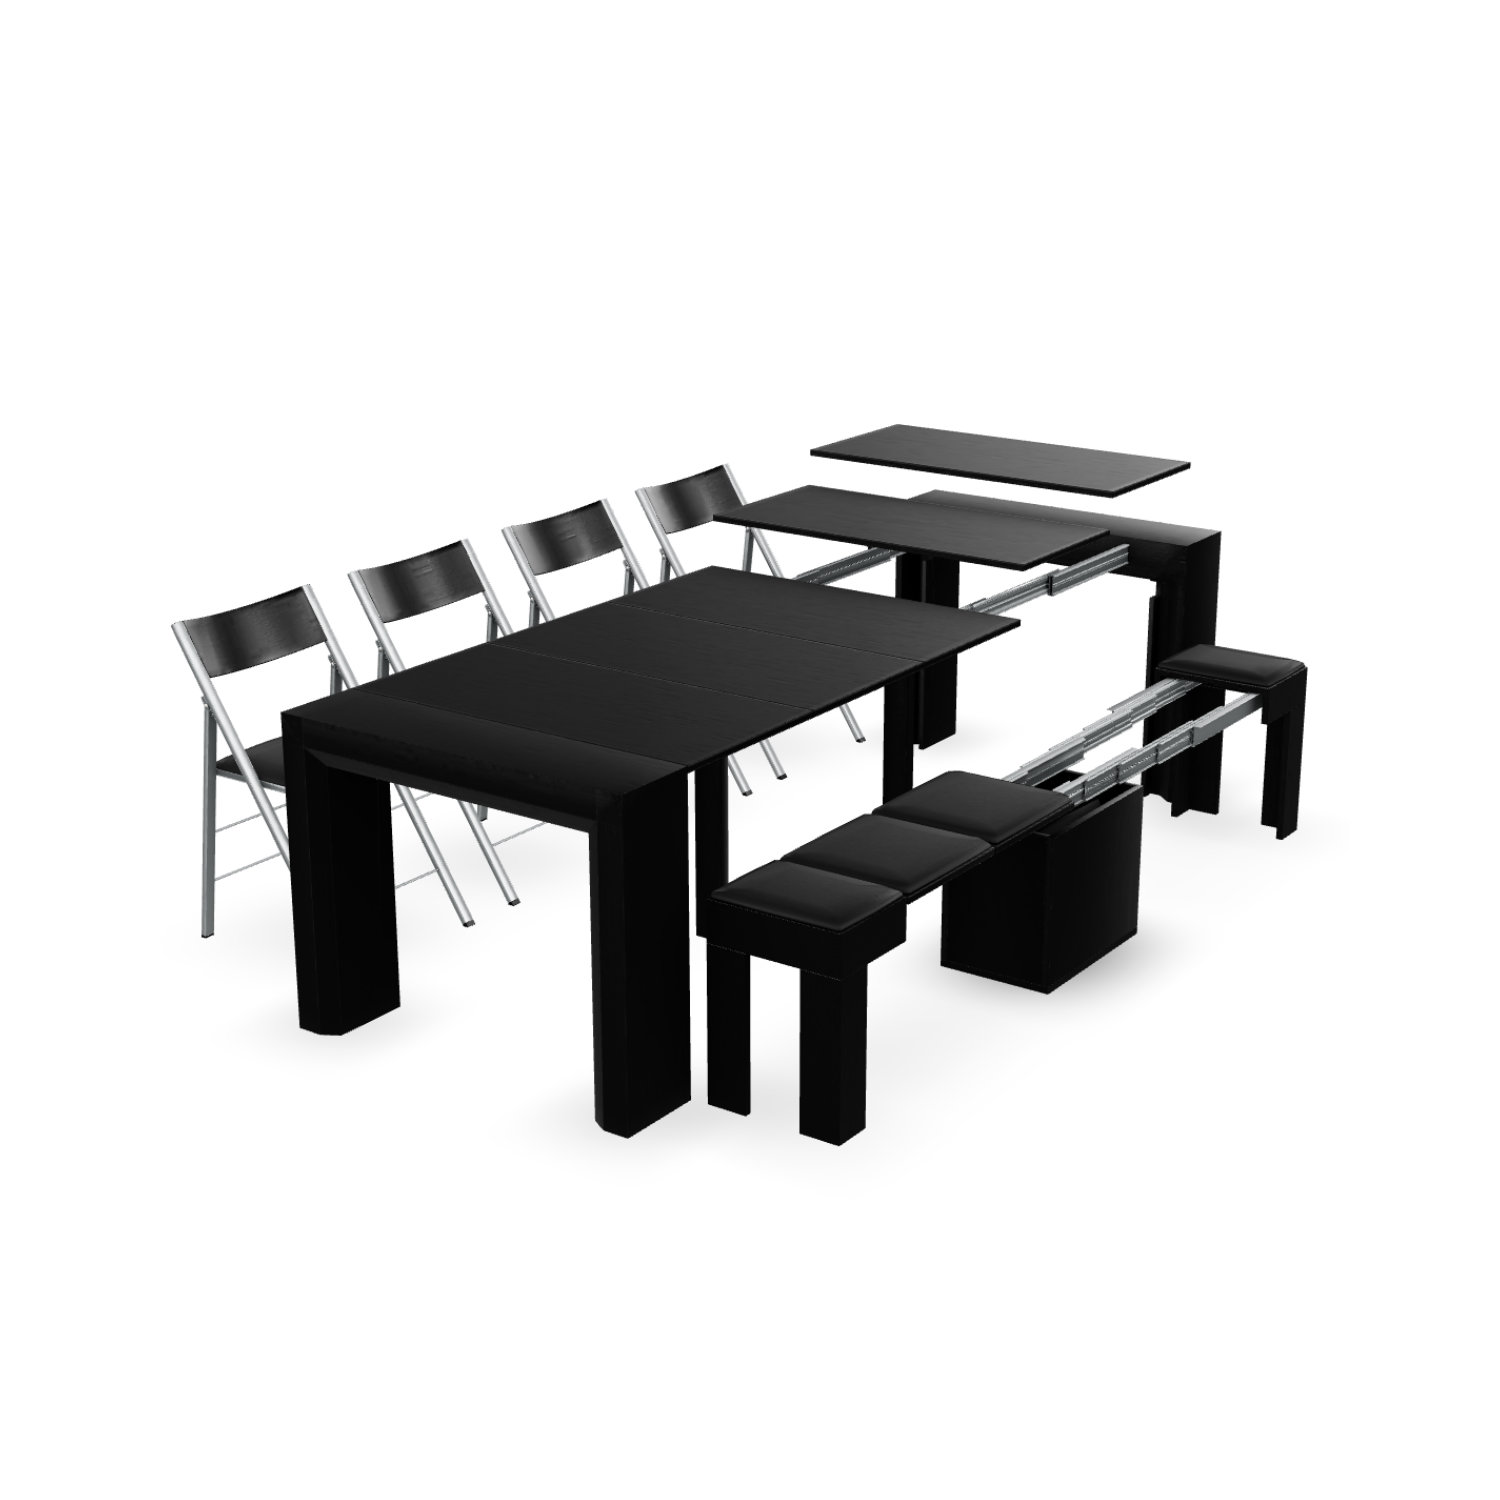 Space Saving Dining Table Set - Furniture Folding Tables, Smarter Wall Beds, Space Savers